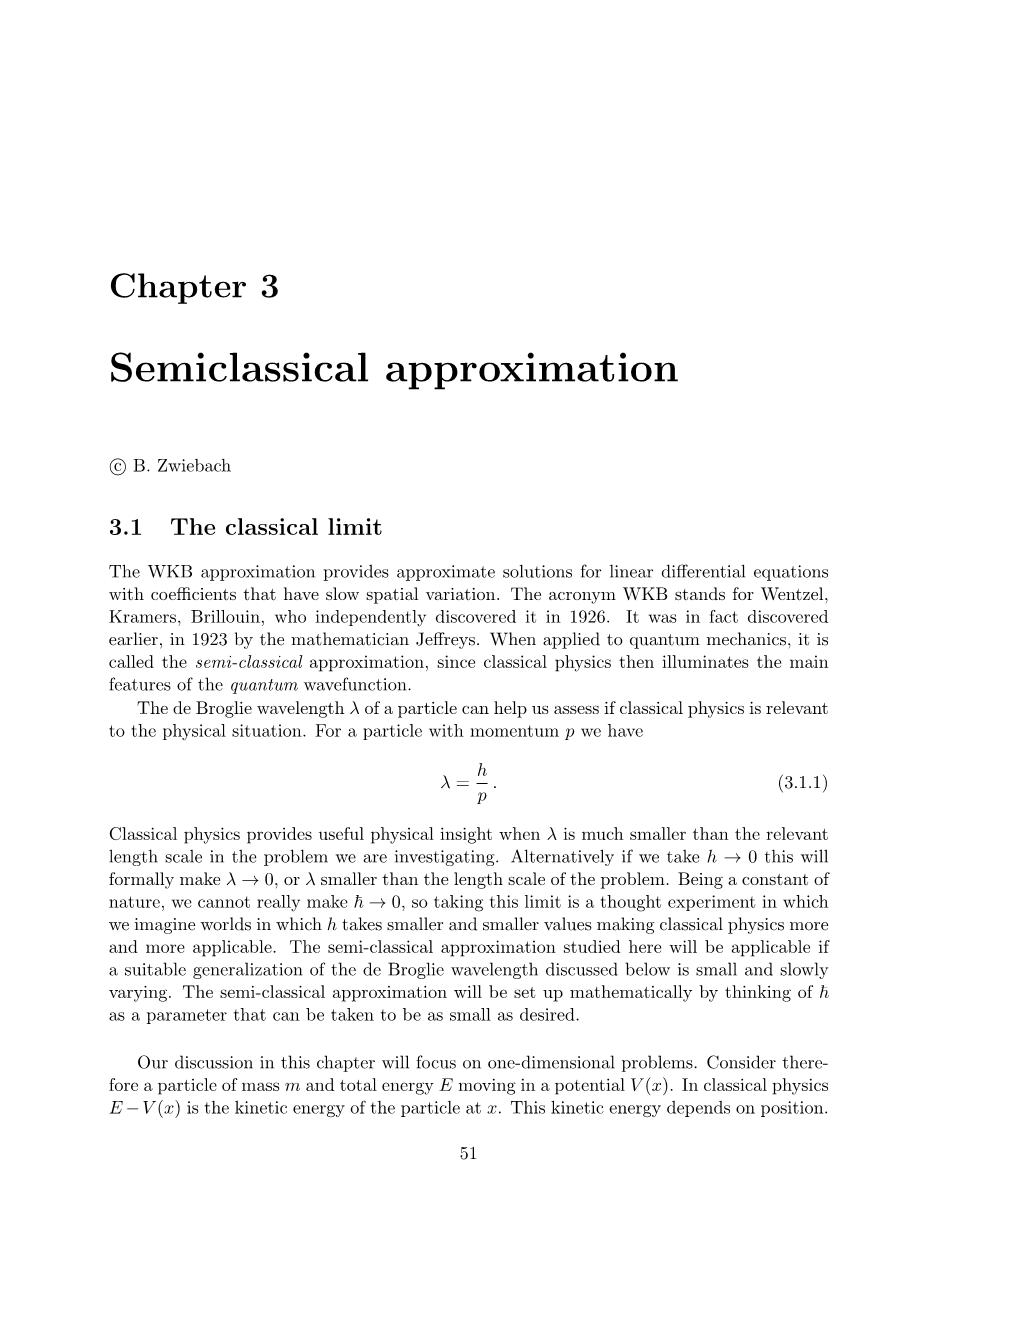 Semiclassical Approximation